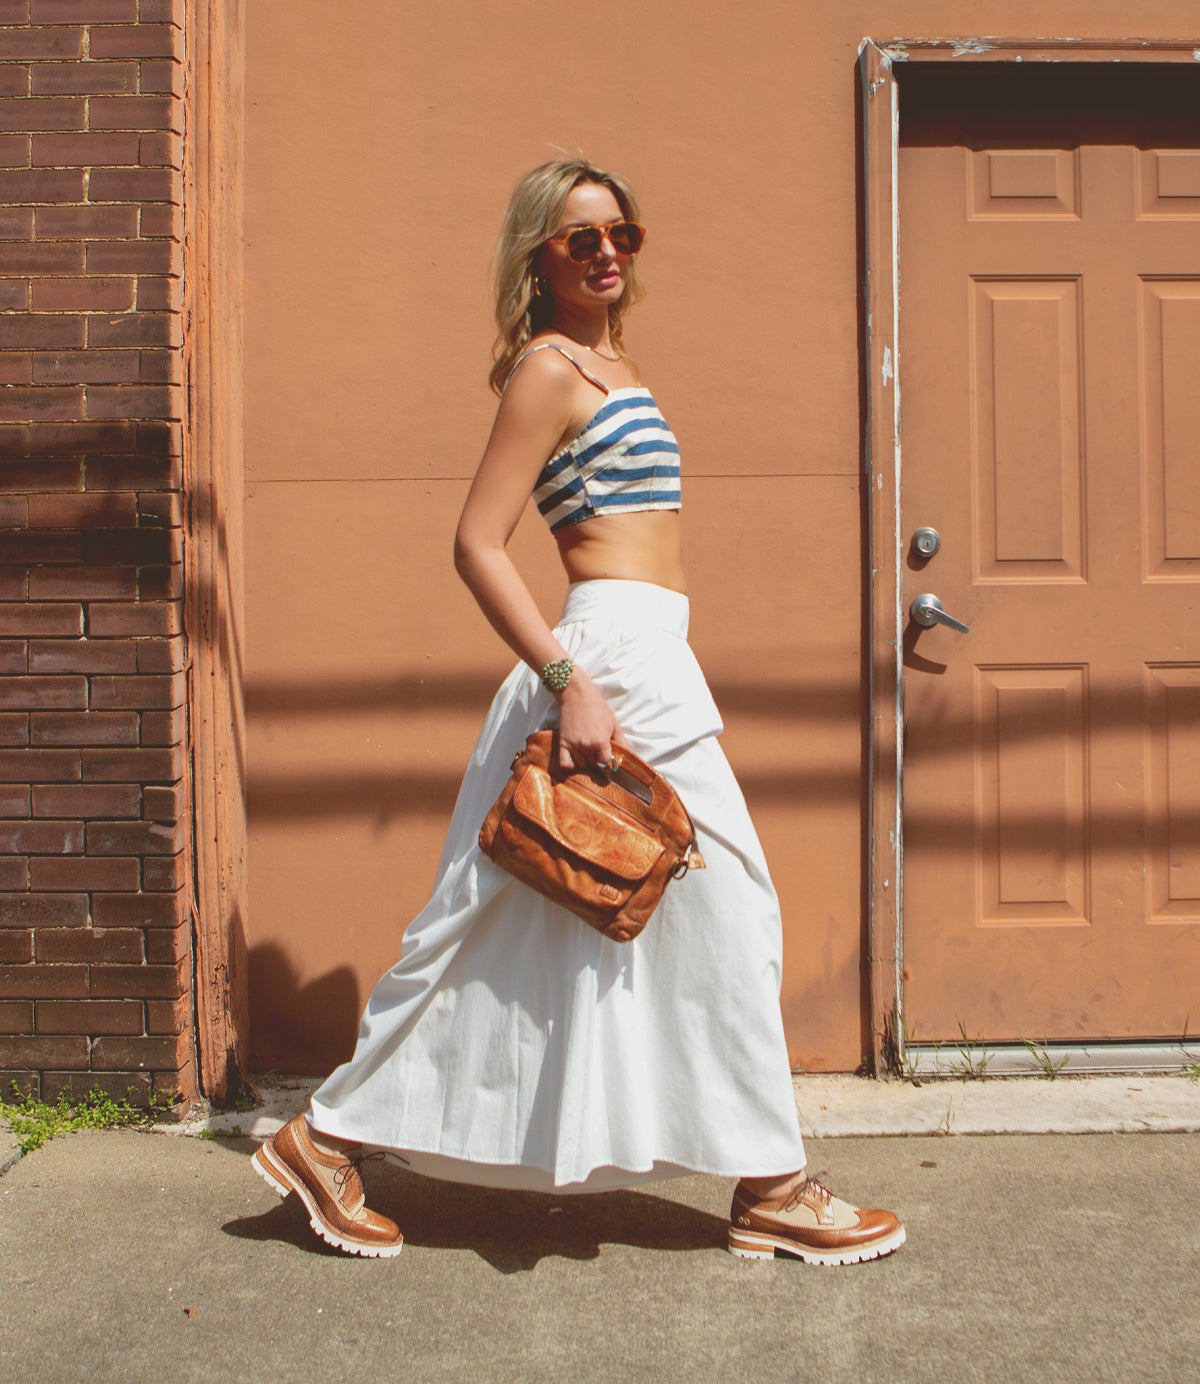 Woman in sunglasses, striped crop top, and white pants walking past an orange door with a Bed Stu Lita K III sustainable fashion brown bag in hand.